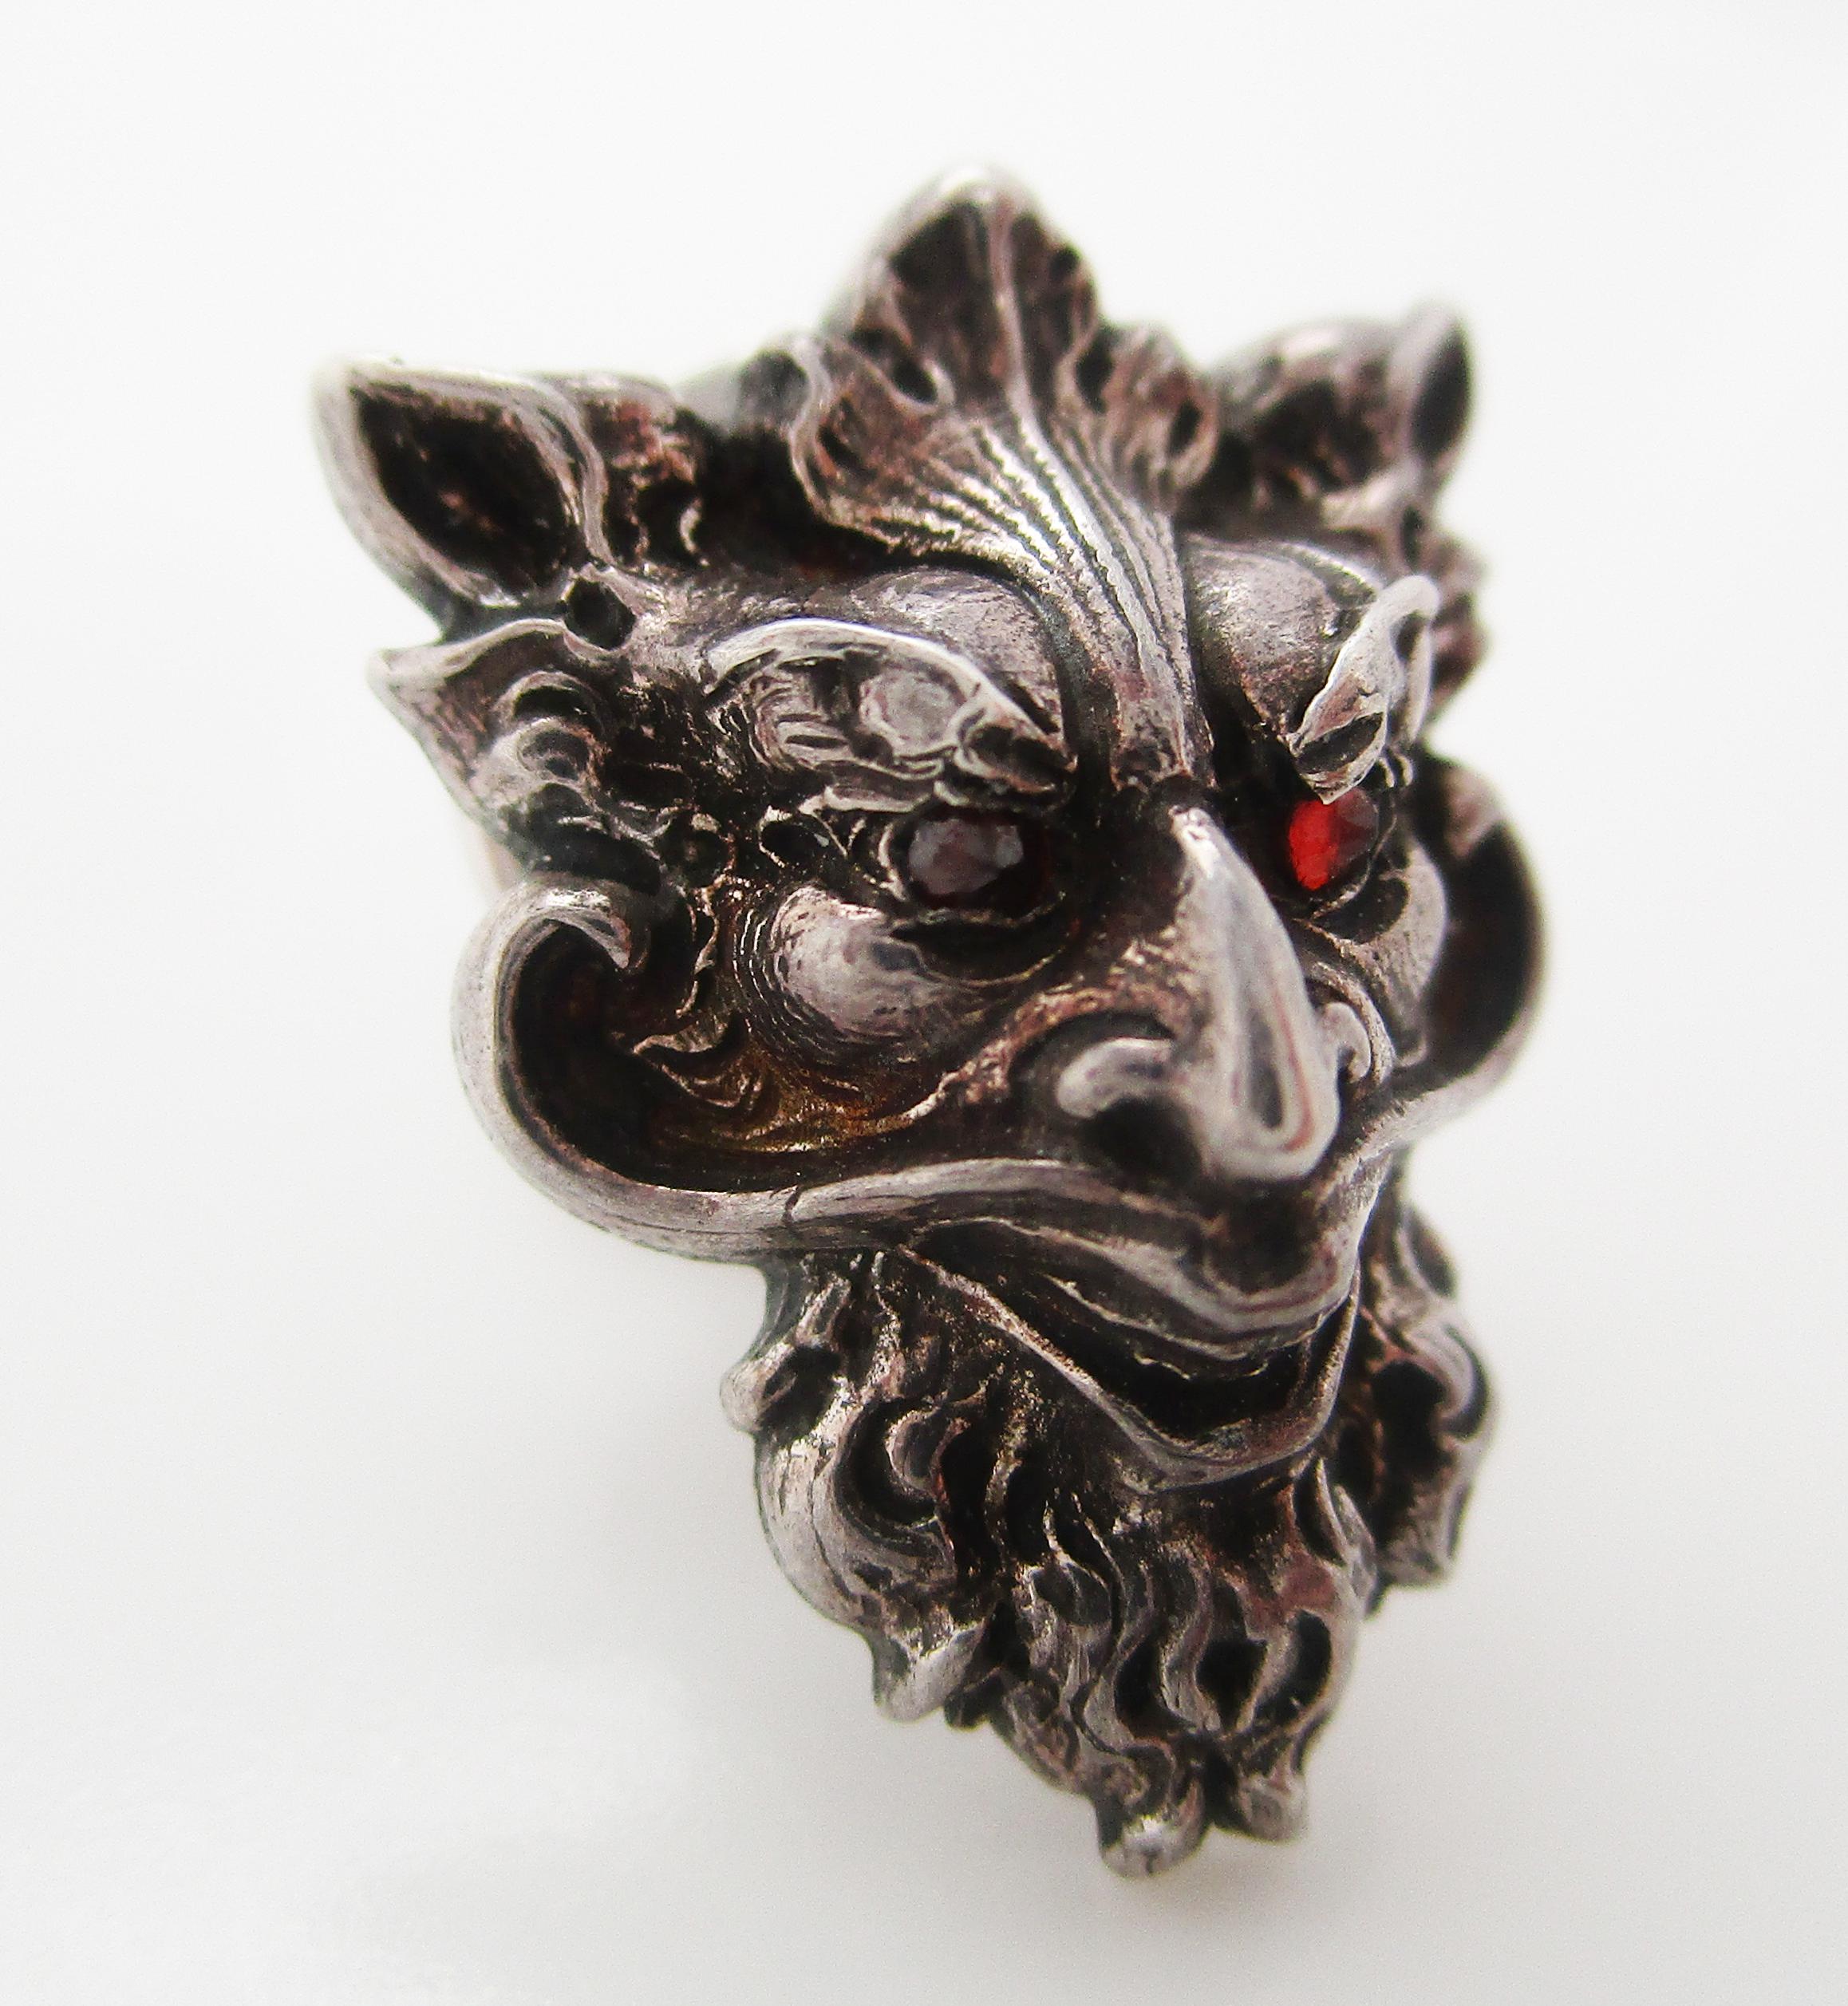 This awesome sterling silver Art Nouveau pin is in the shape of a grotesque devil’s face with rose-cut garnet eyes!
The details in this pin are incredible. The lines of the goblin’s face and smile are long and curving - definitive Art Nouveau! The